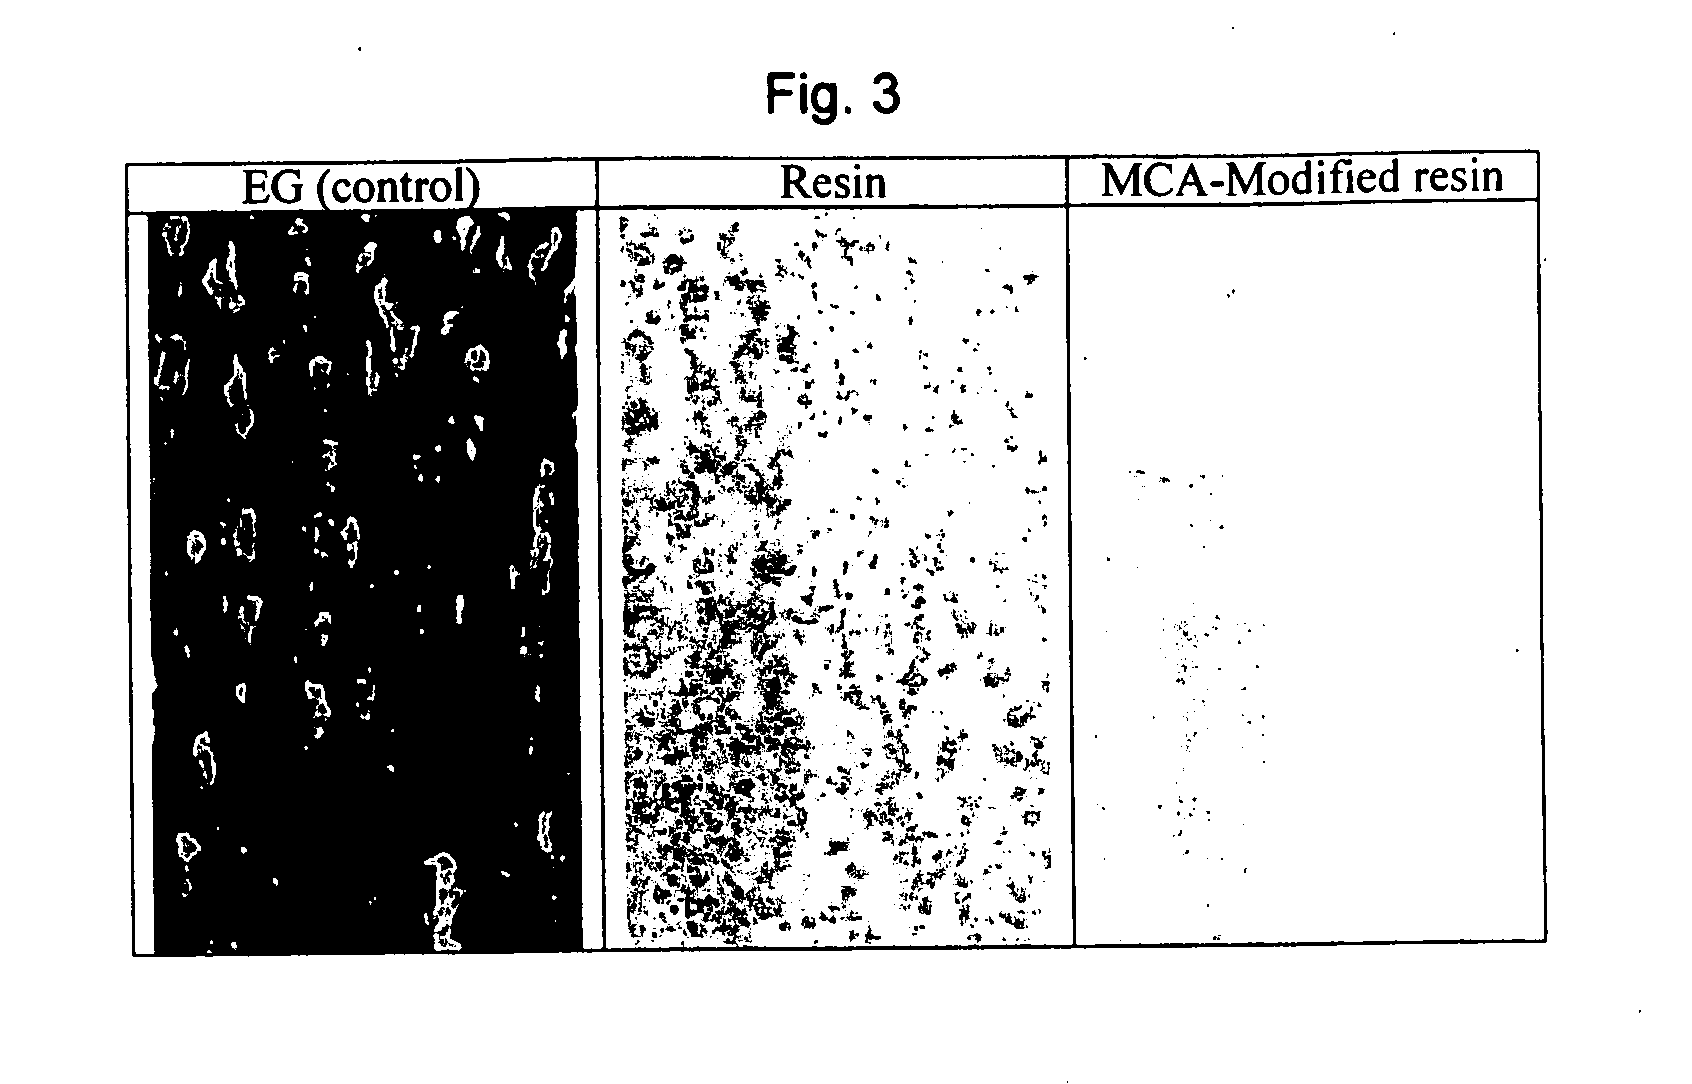 Method of improving the performance of organic coatings for corrosion resistance